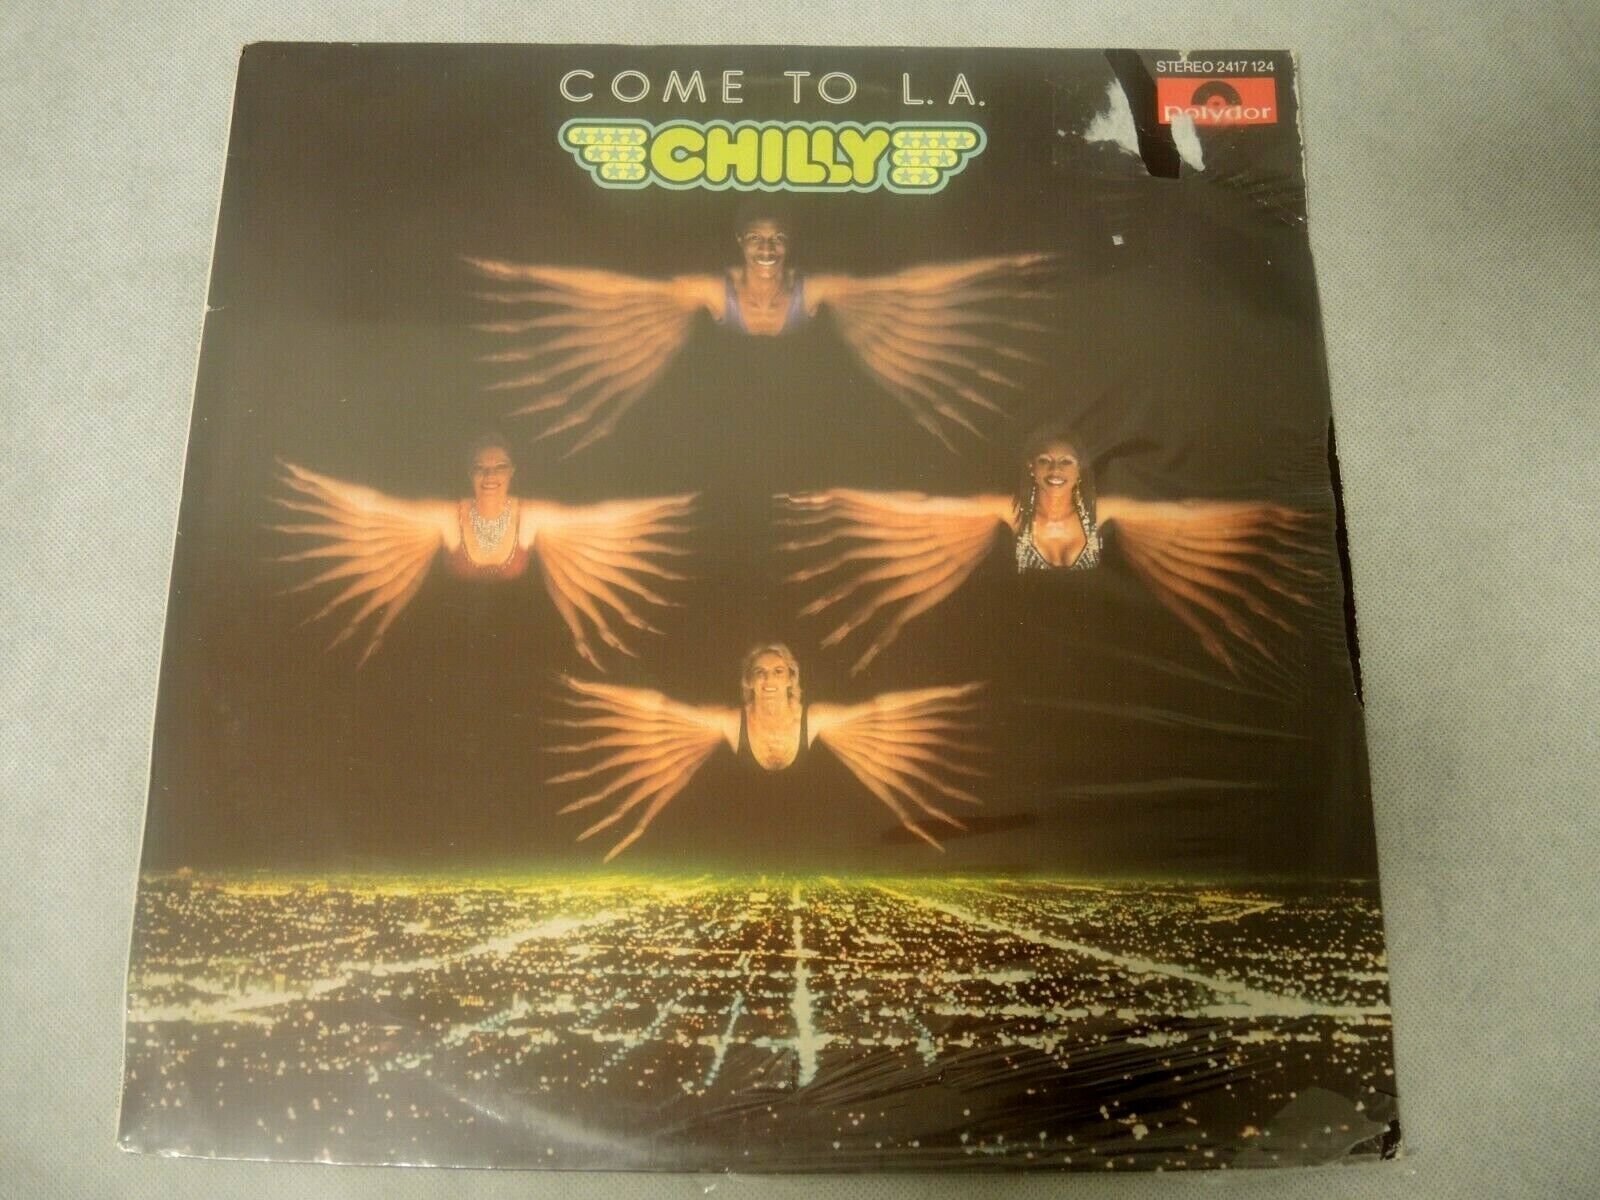 LP Chilly Come to L.A., Made in Germany 1979, Polydor 2417124, NEU OVP